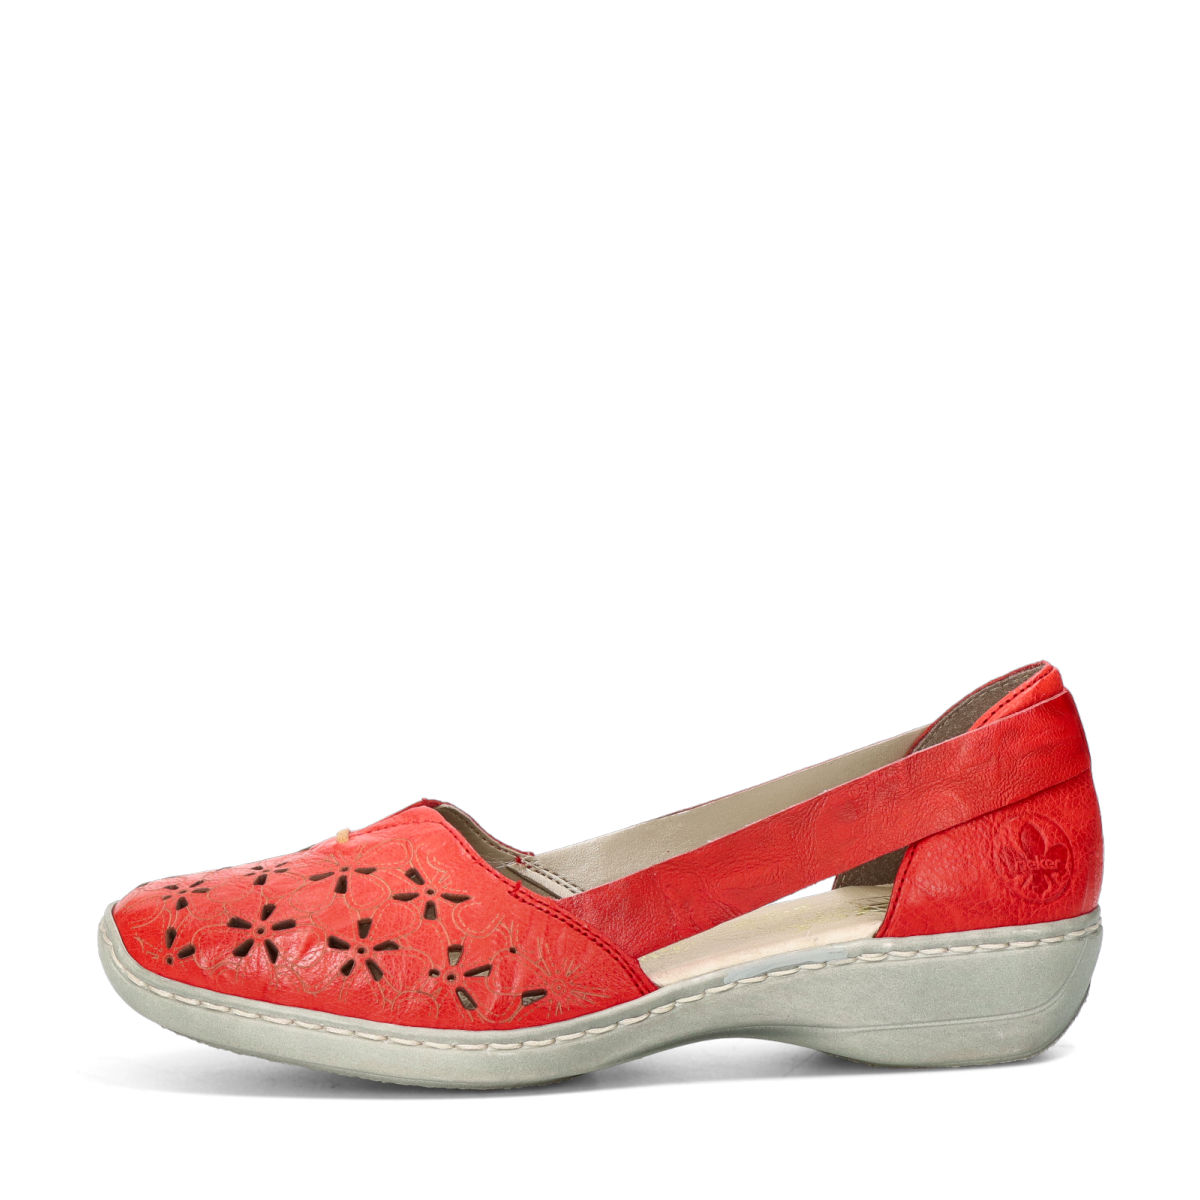 Rieker women's comfortable shoes - red Robel.shoes